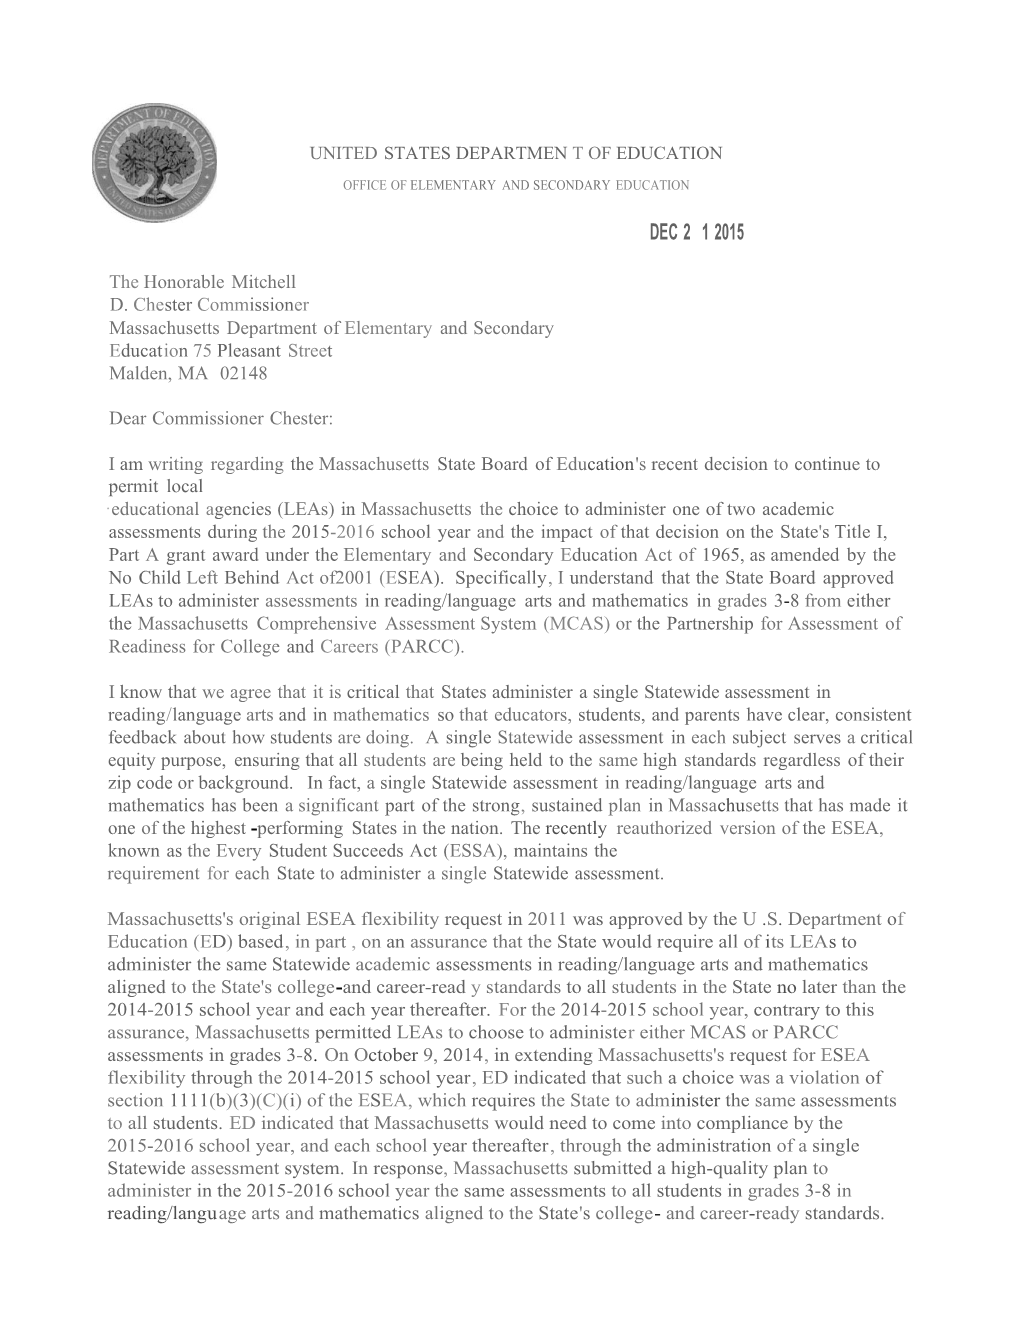 US Department of Education Letter to M.Chester, Dec 21, 2015